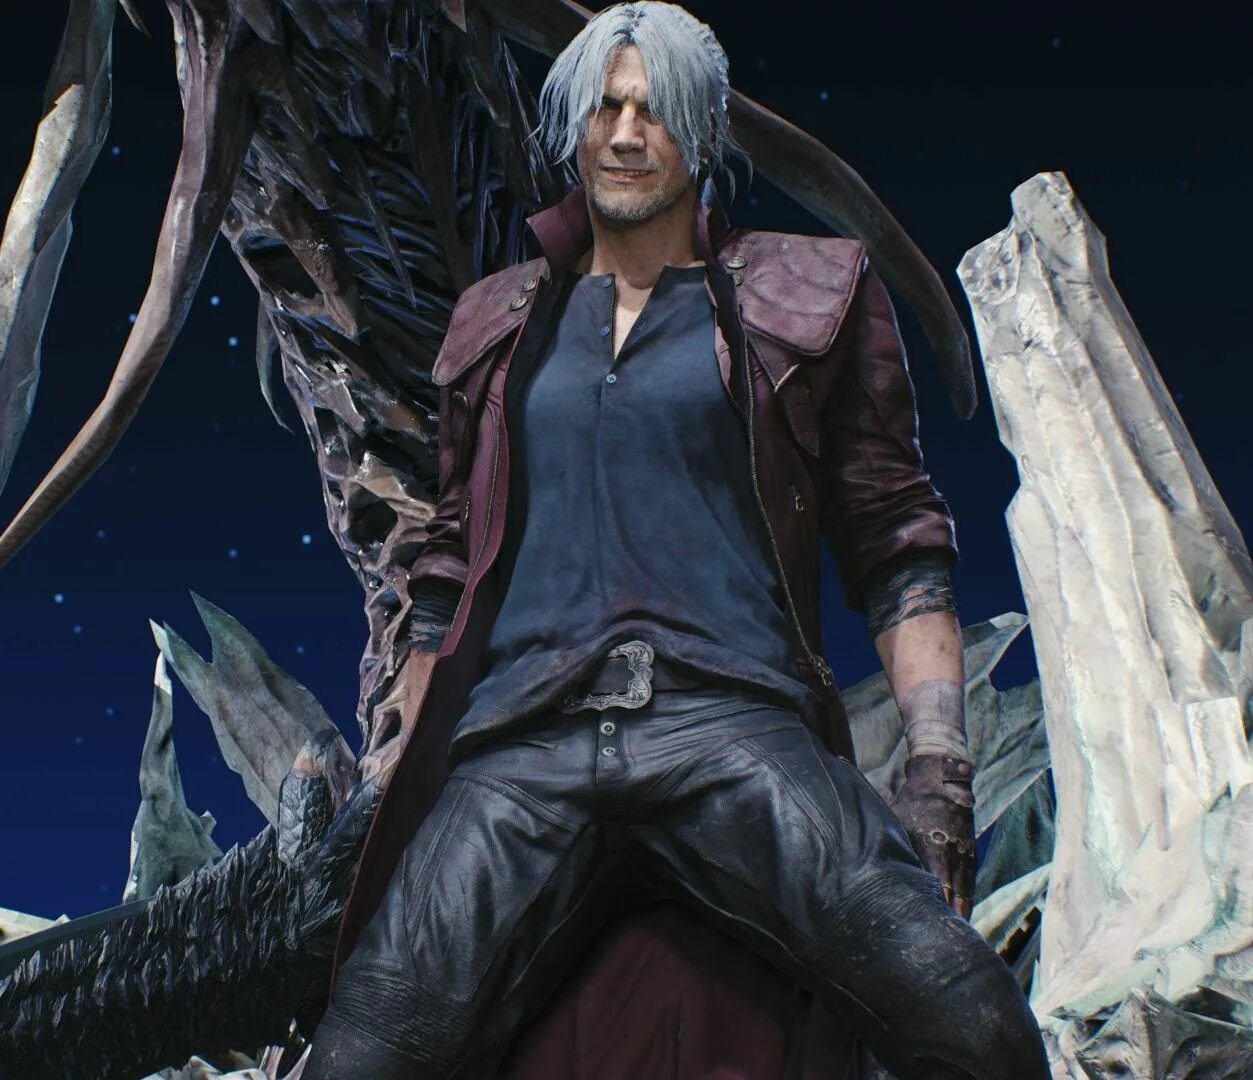 Данте под. Данте Devil May Cry. Данте DMC 5. Devil May Cry 5 Dante. Данте Devil May Cry 3.